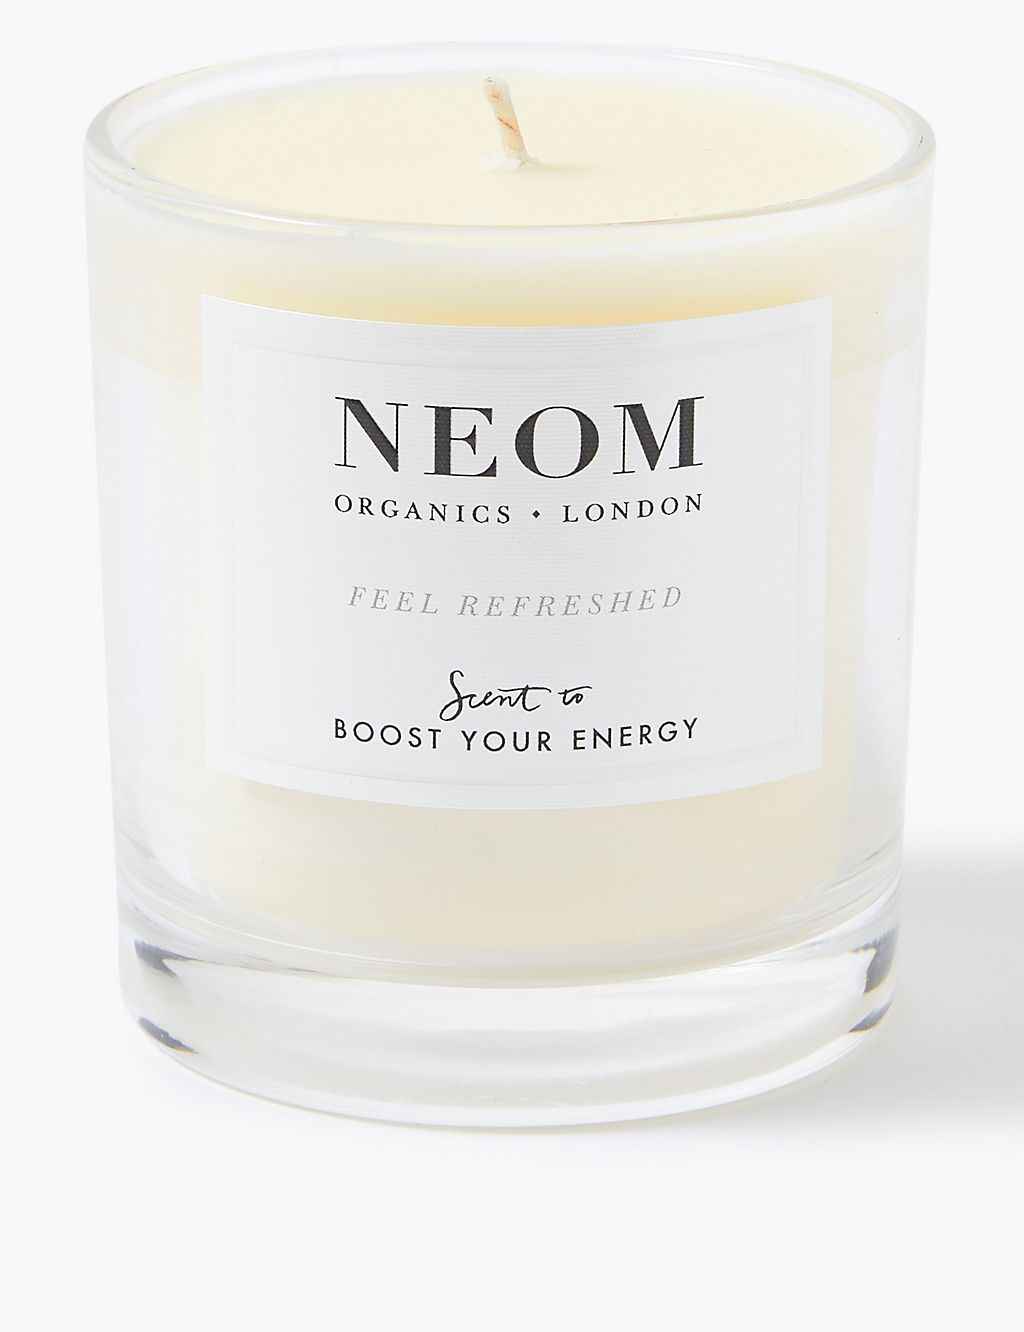 Feel Refreshed Candle (1 wick) 185g 1 of 5